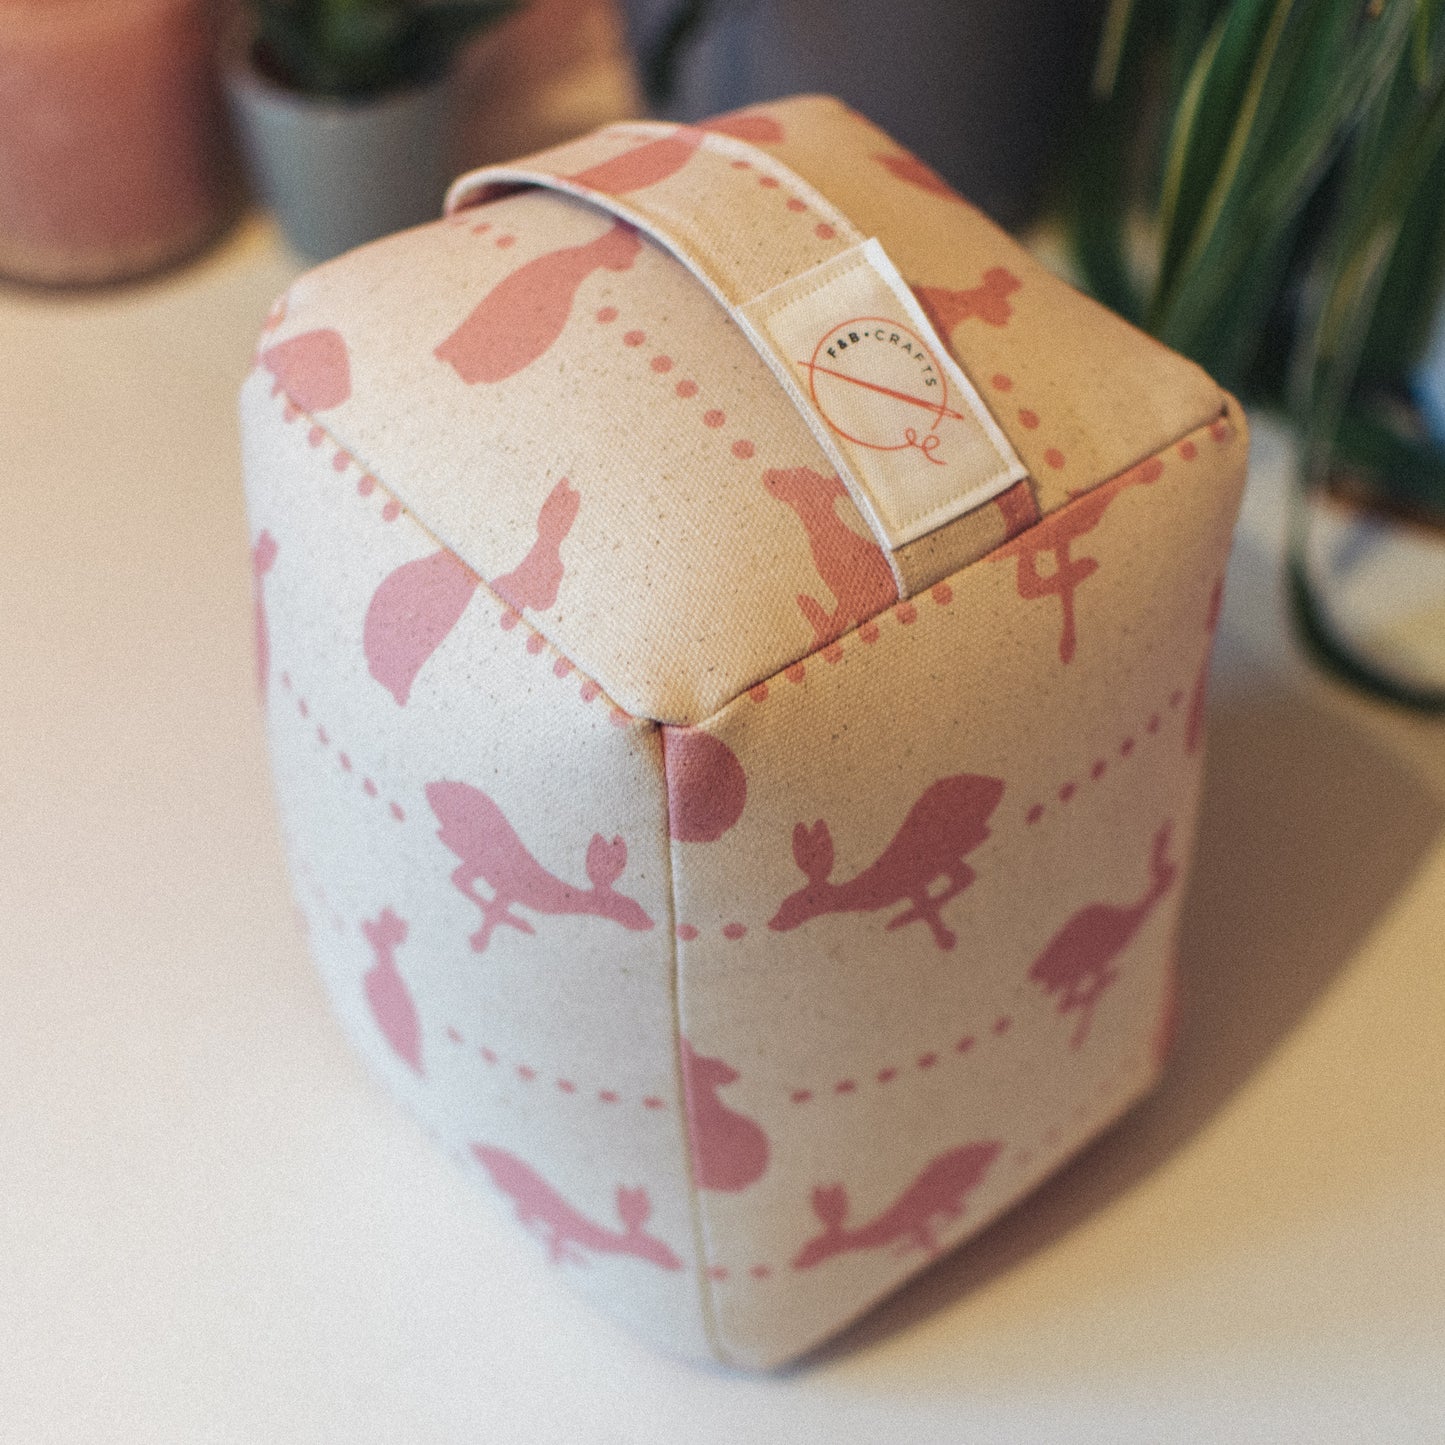 Organic Cotton Hare & Dot Printed Pink and Cream Doorstop for Country Home Decor